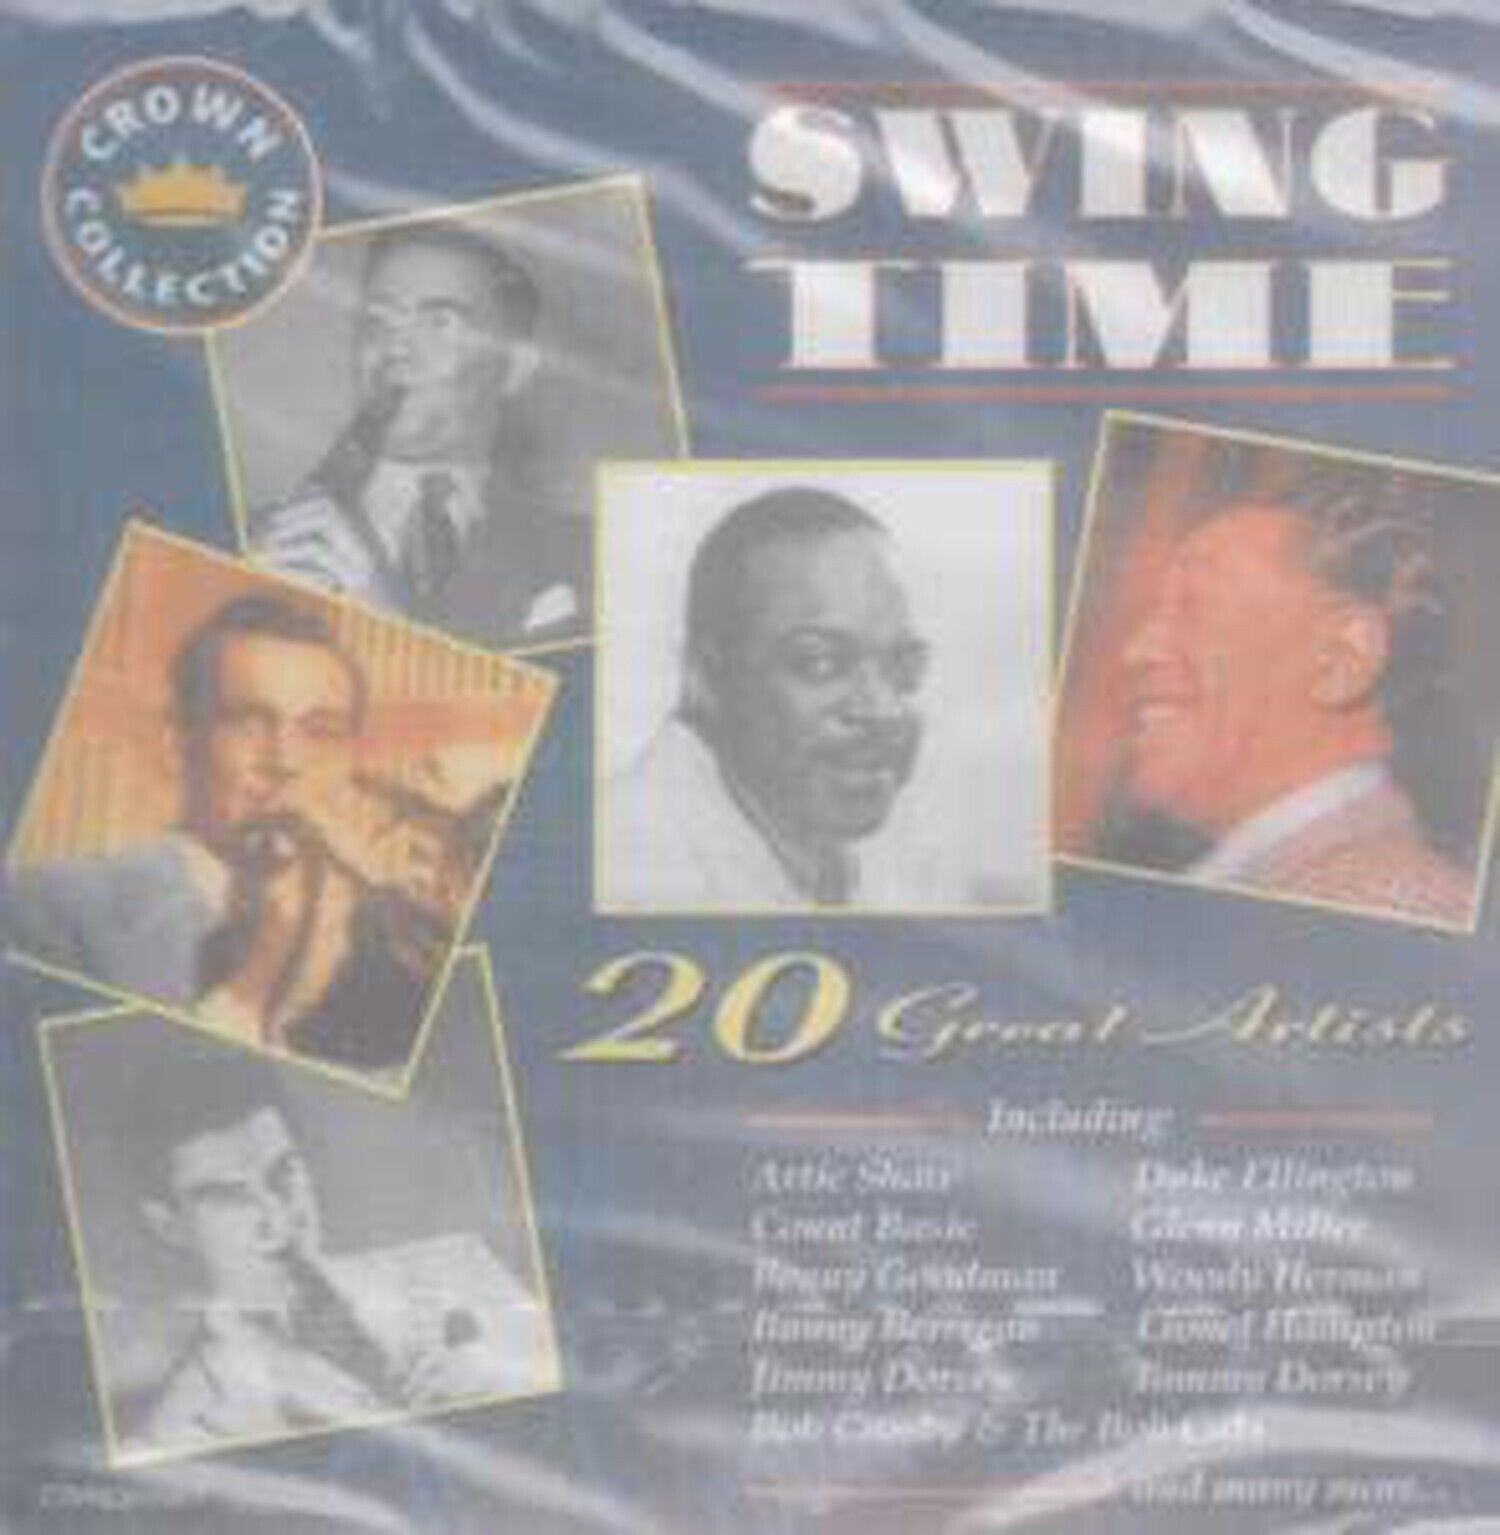 Swing Time [Audio CD] Canadian Brass 